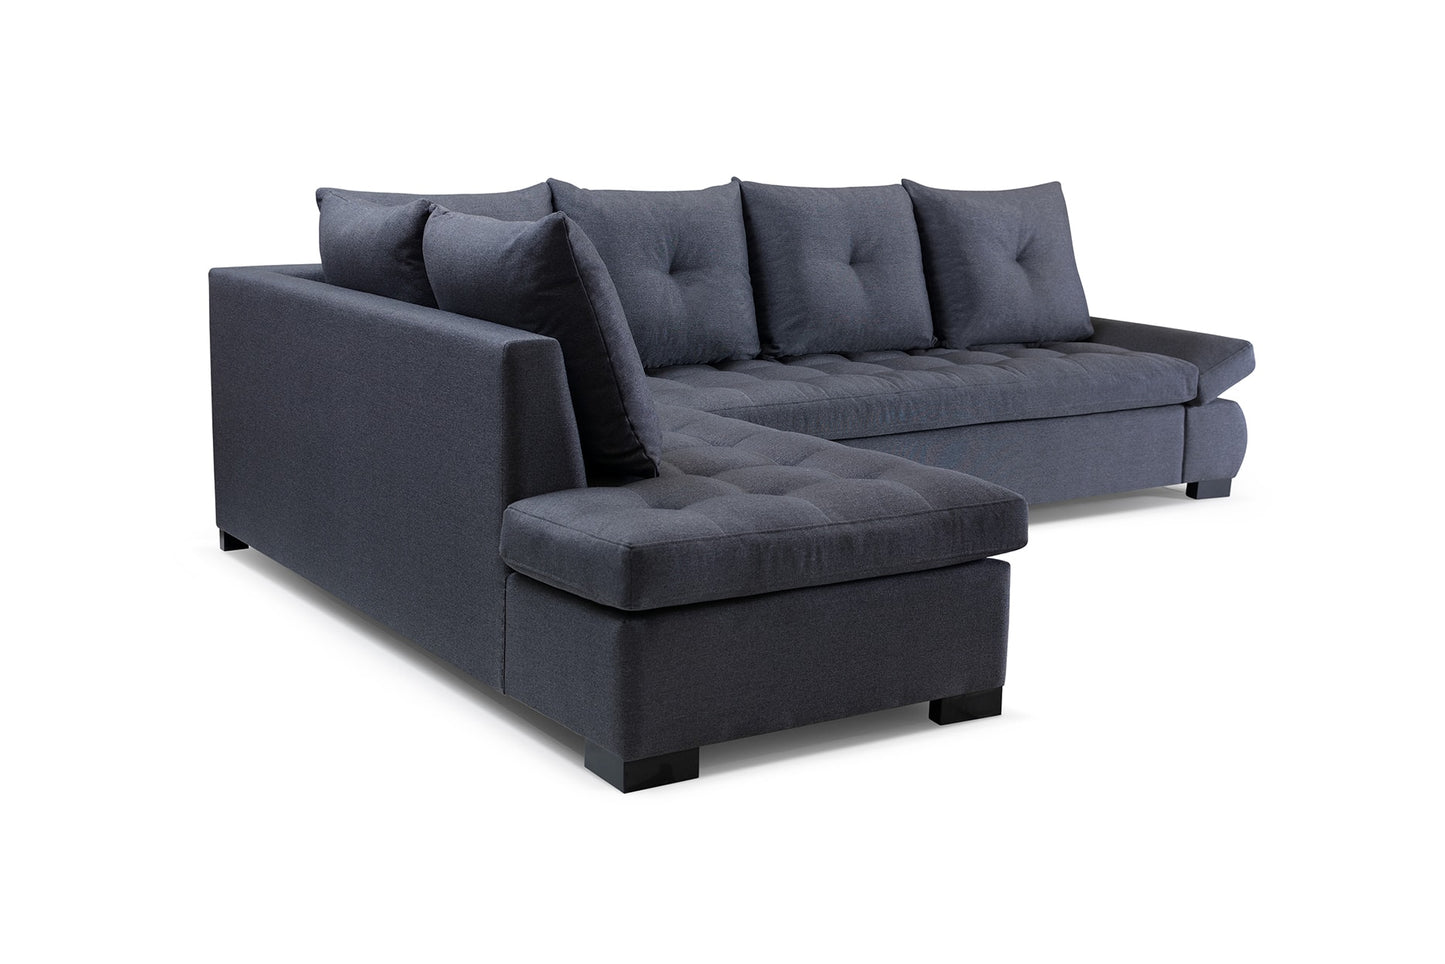 ARISTOCRAT - Very comfortable and elegant Corner Sofa with silicone in seats and awesome set of cushions >320x223cm<